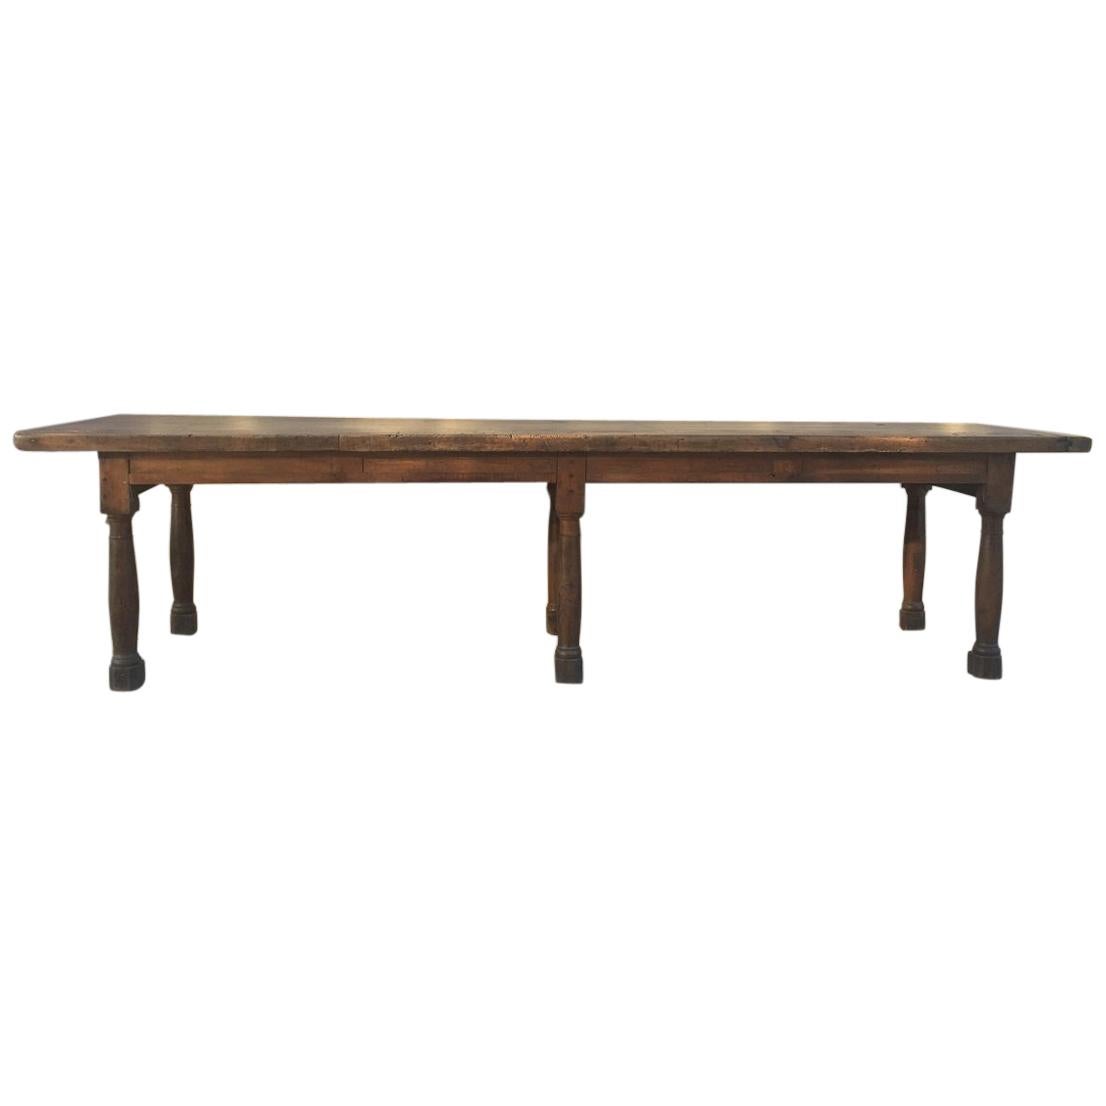 Late 18th Century Walnut Dining Table